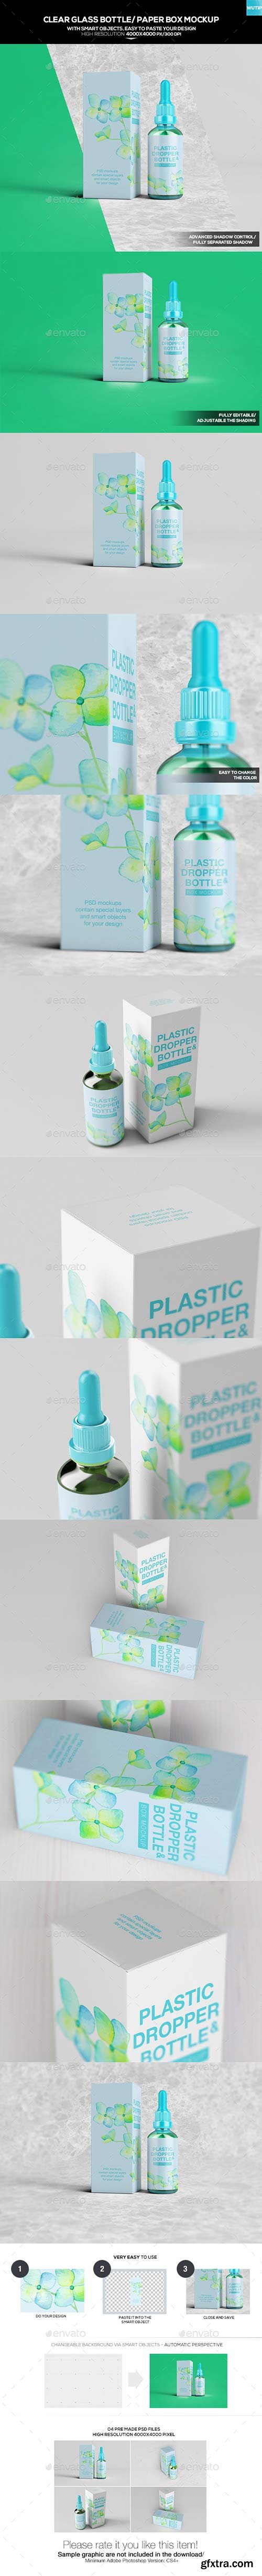 Graphicriver - Clear Glass Bottle/ Paper Box Mockup 20269860